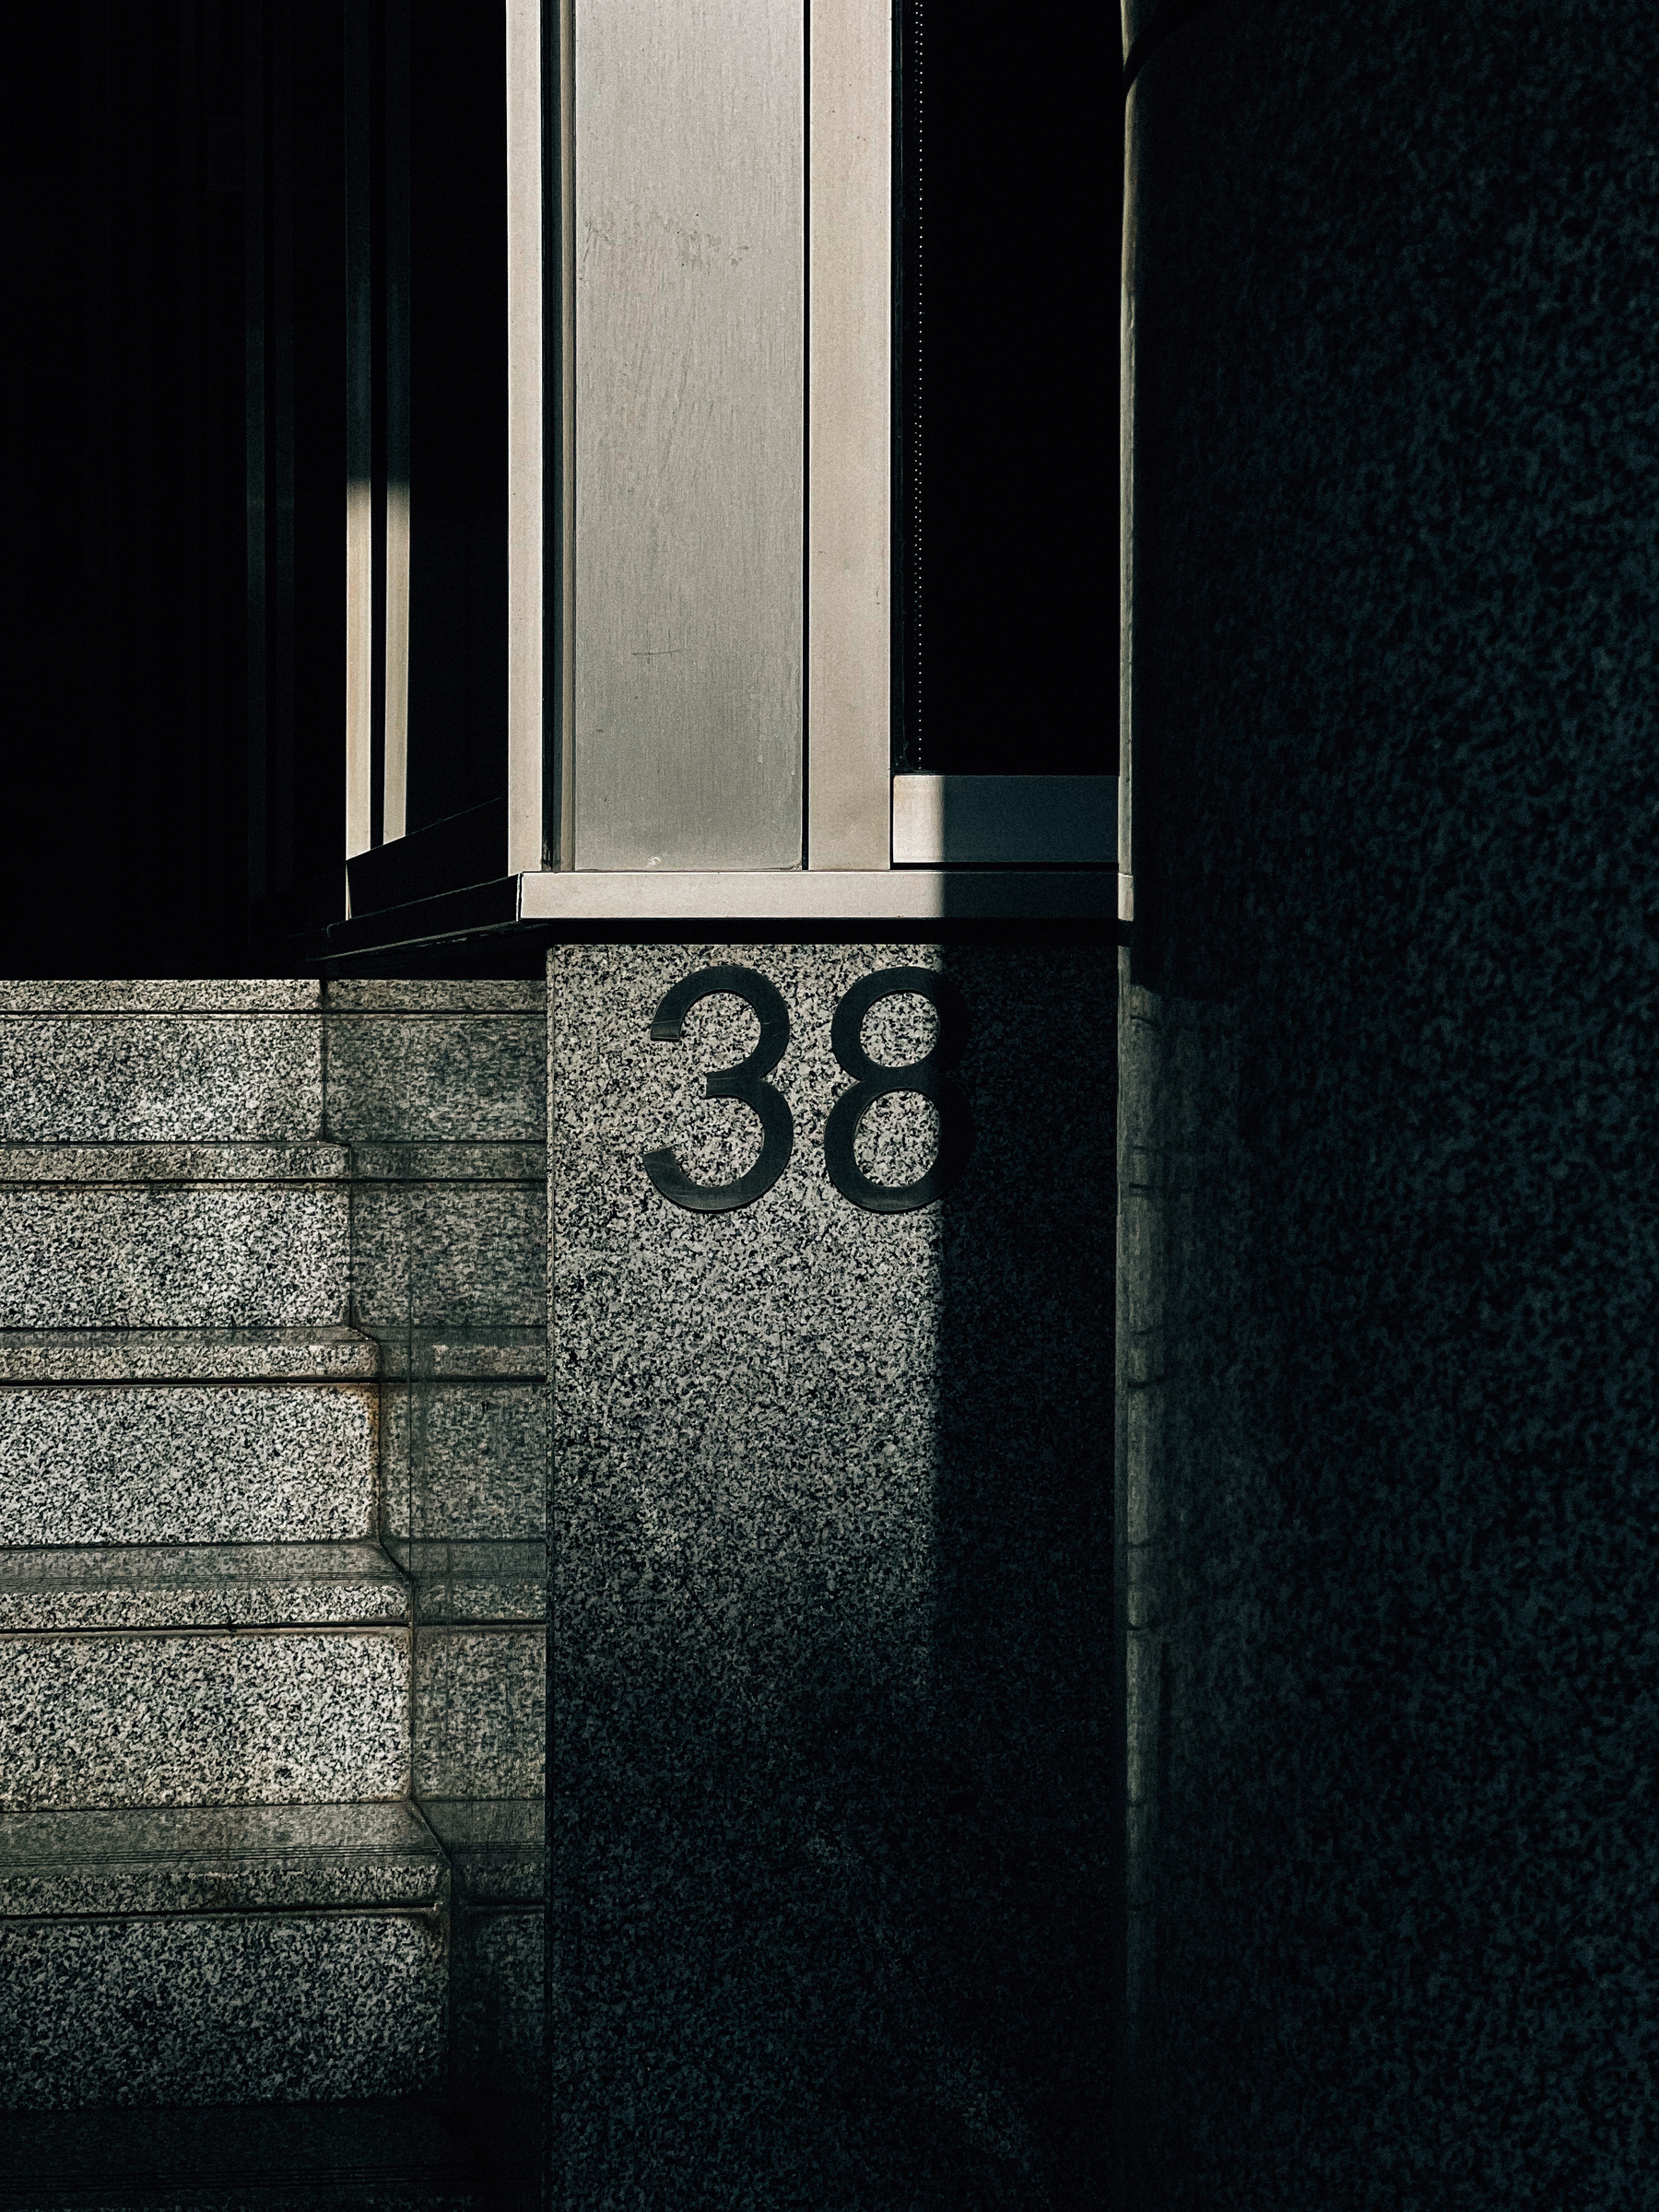 A number of 38 inscribed on a shadowed stone wall next to granite stairs and a column, with sunlight casting contrasting light and shadow effects.